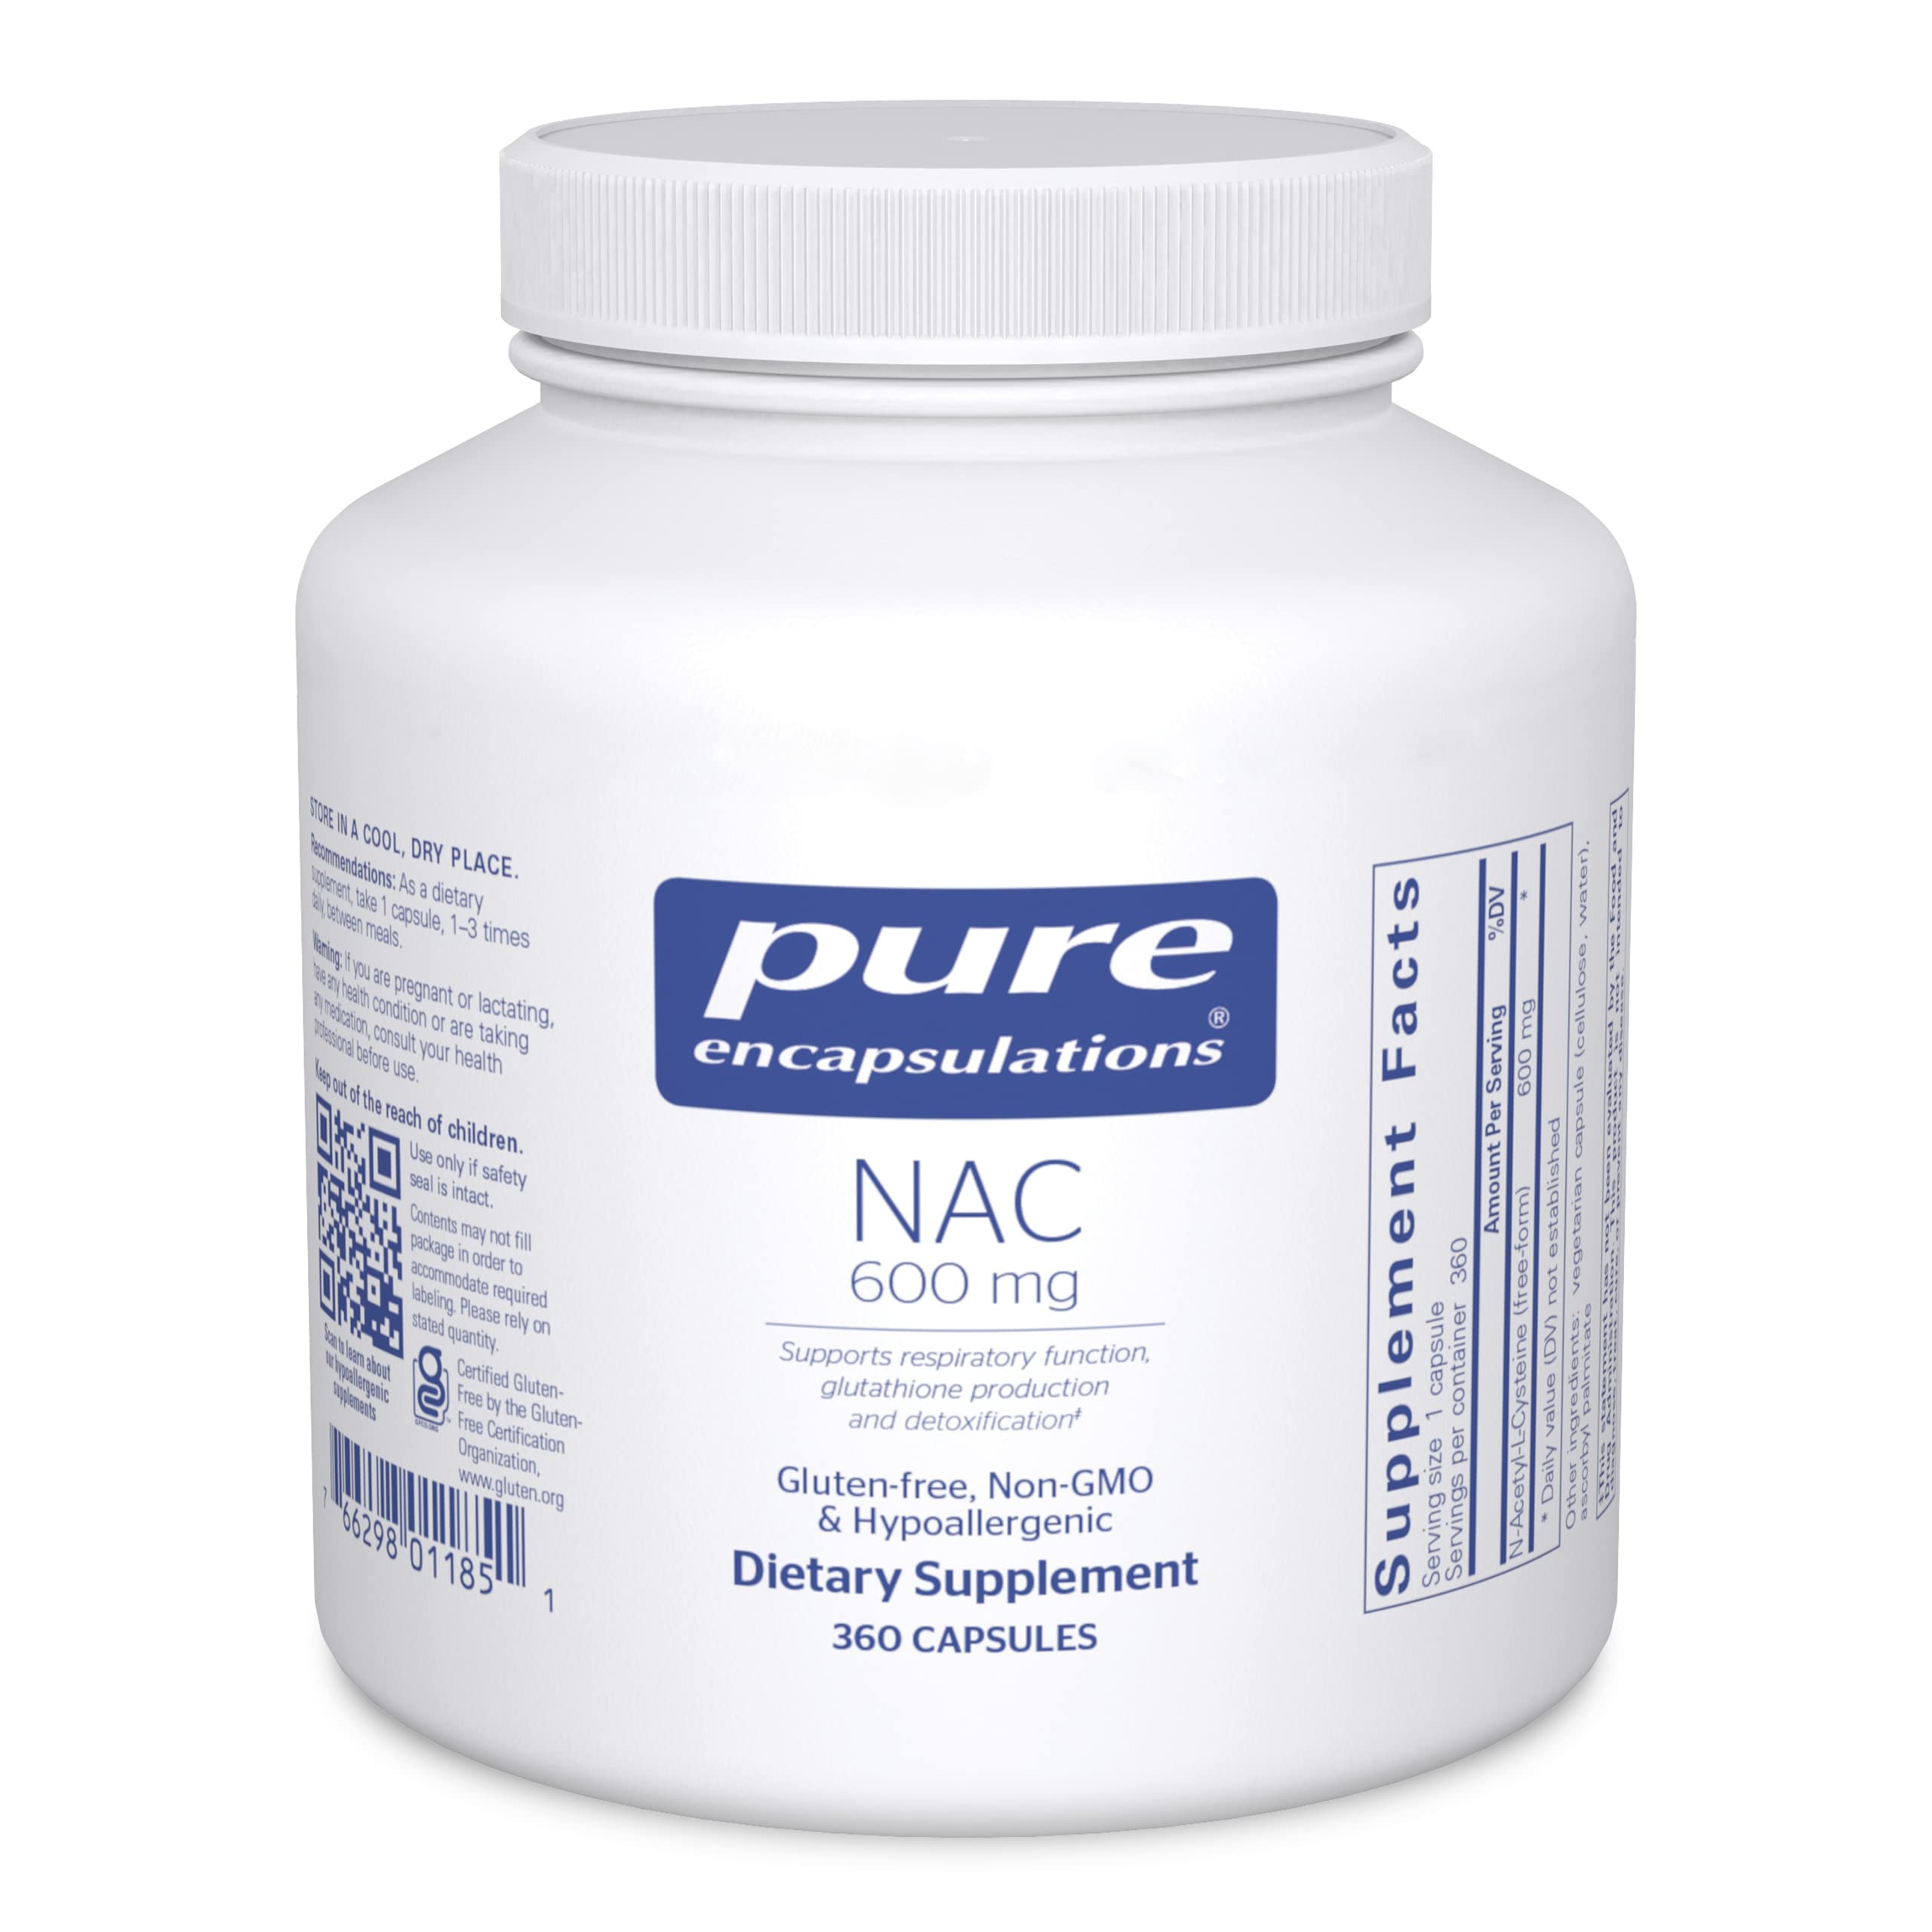 Pure Encapsulations NAC 600 mg - N-Acetyl Cysteine NAC Supplement for Lung Health & Immune Support, Liver Support & Antioxidants* - with Freeform N-Acetyl-L-Cysteine - 360 Capsules